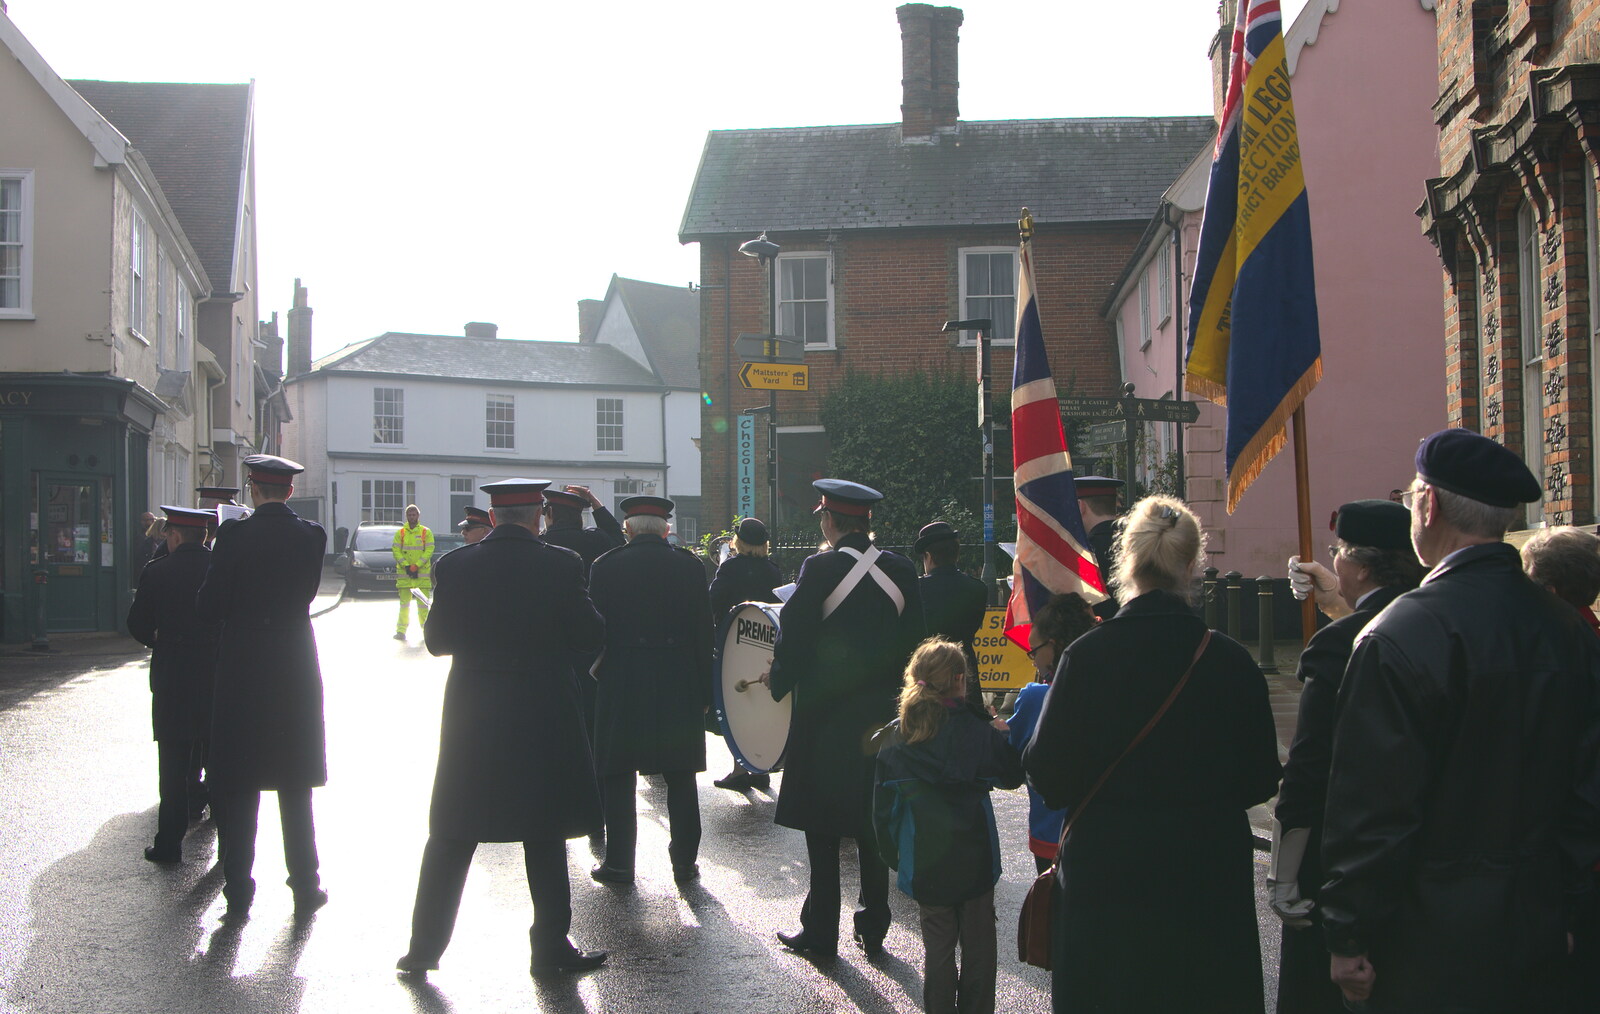 The band heads off in to the winter sun from A Remembrance Sunday Parade, Eye, Suffolk - 9th November 2014